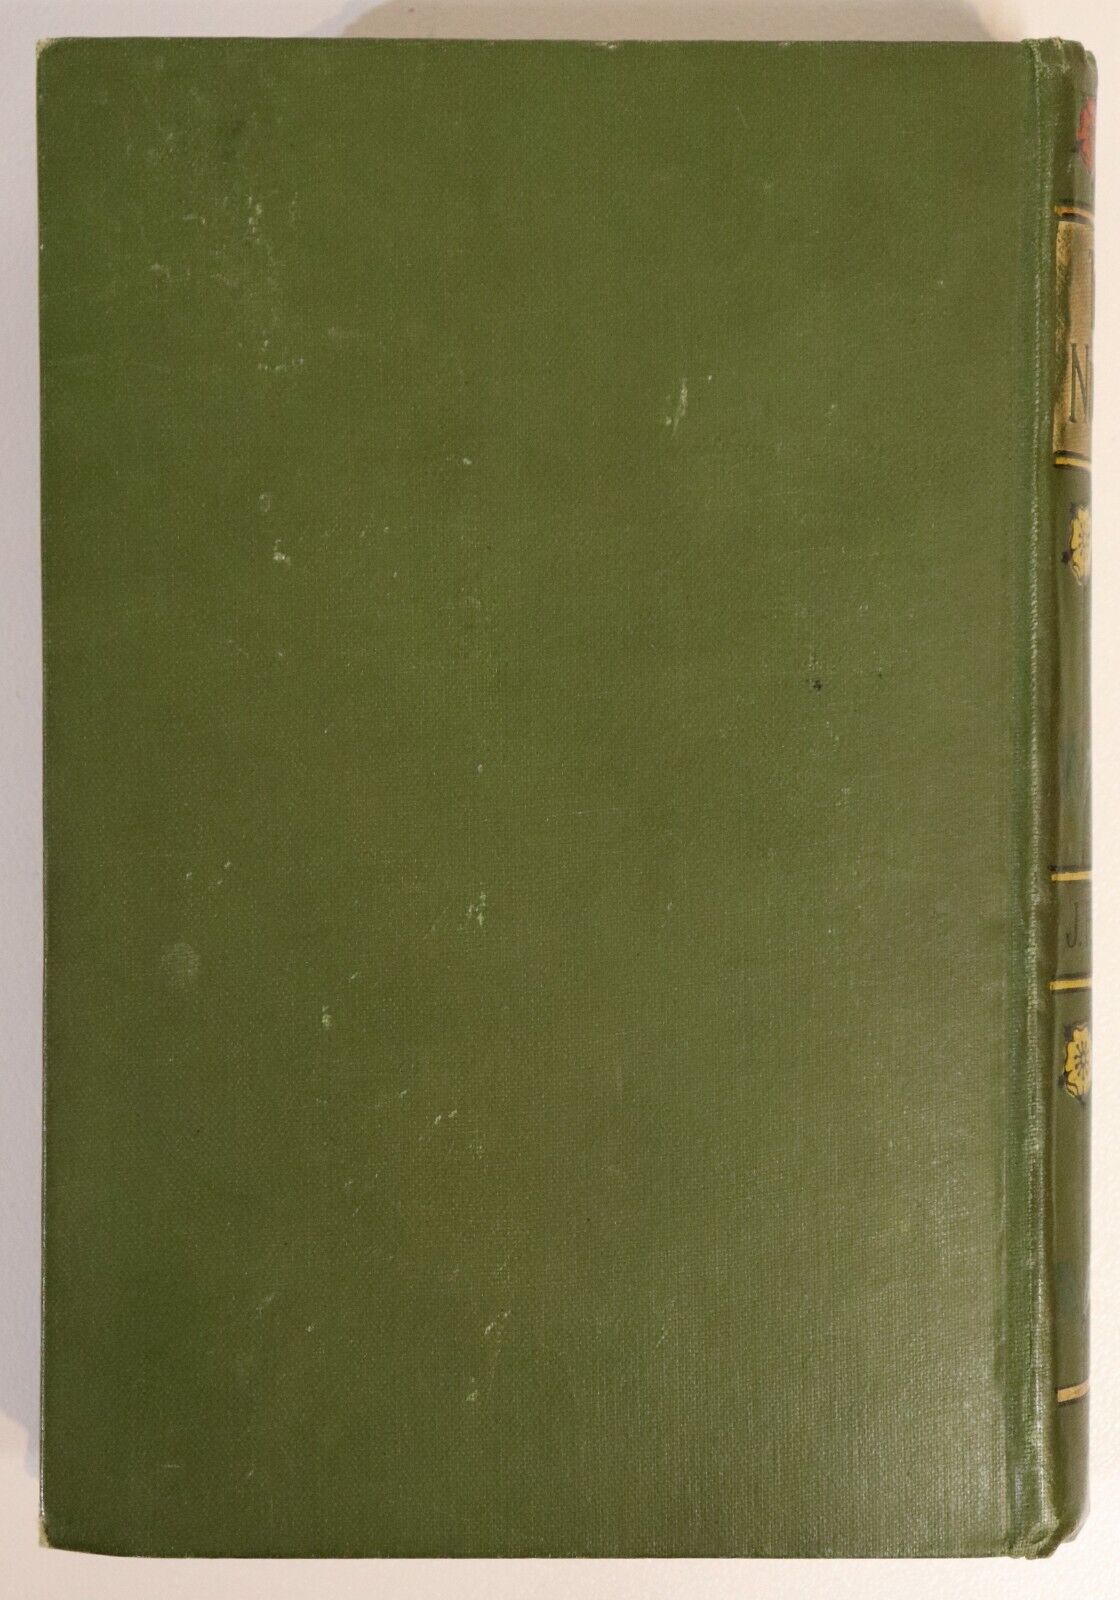 c1900 Tom's Nugget: A Story Of The Goldfields Antique Australian Fiction Book